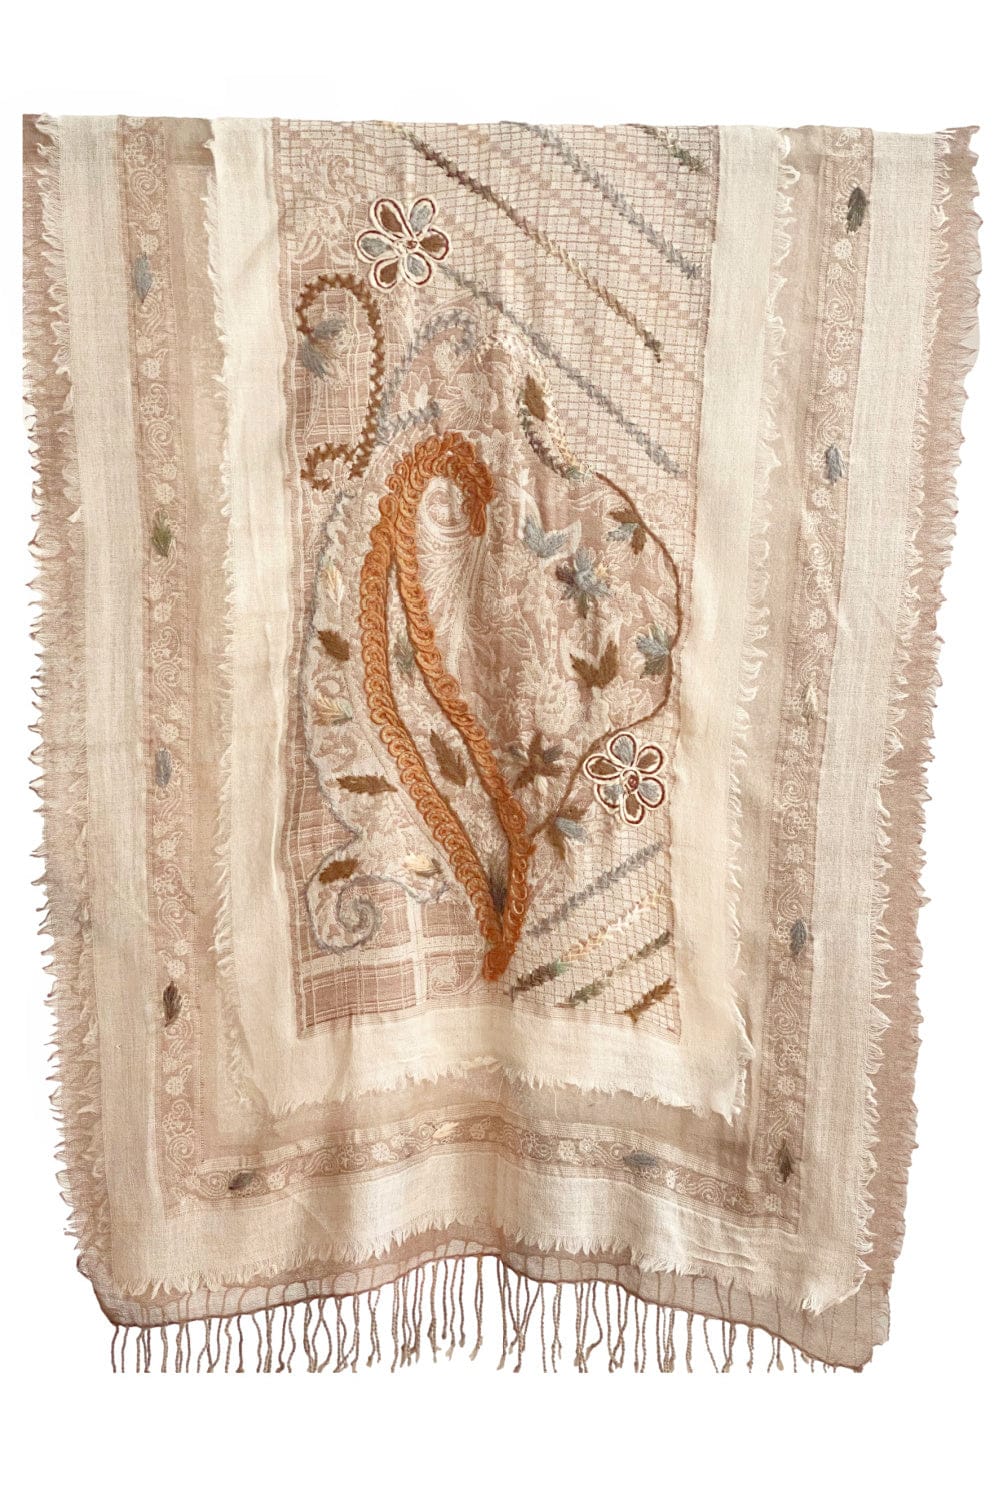 Beige and creme paper wool scarf with hand stitched design detail.